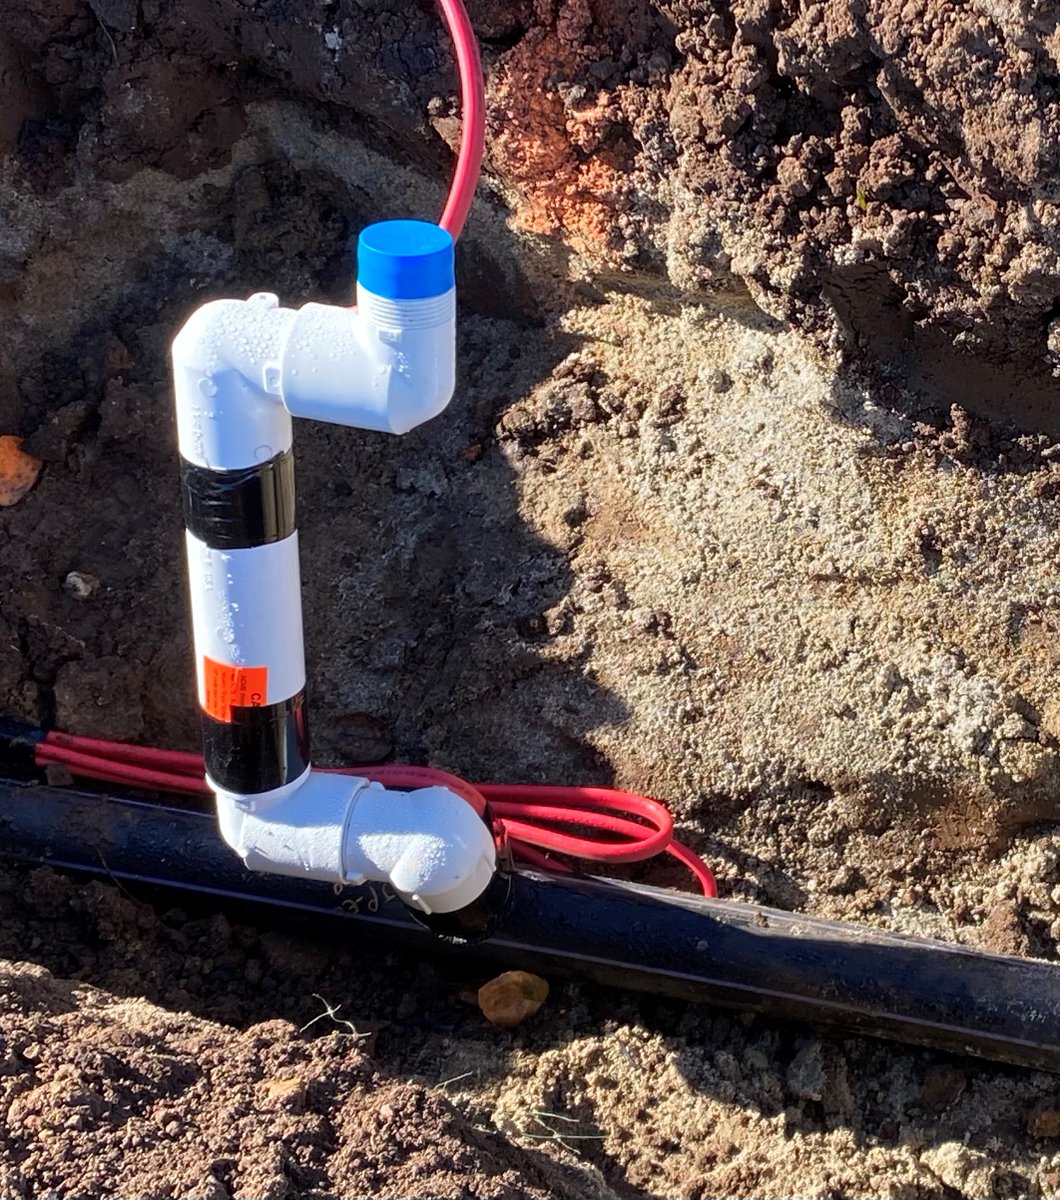 Yes, #AquaFuse world-class, #AquaSaddle Fused #HDPE Swing Joint Service Saddle installed on an HDPE pipe system. A complete game-changer!

#golfirrigation #aquafusion #golf #architect #irrigation #landscaping #golfcoursedesign #contractor #ngcoa #eigca #asgca